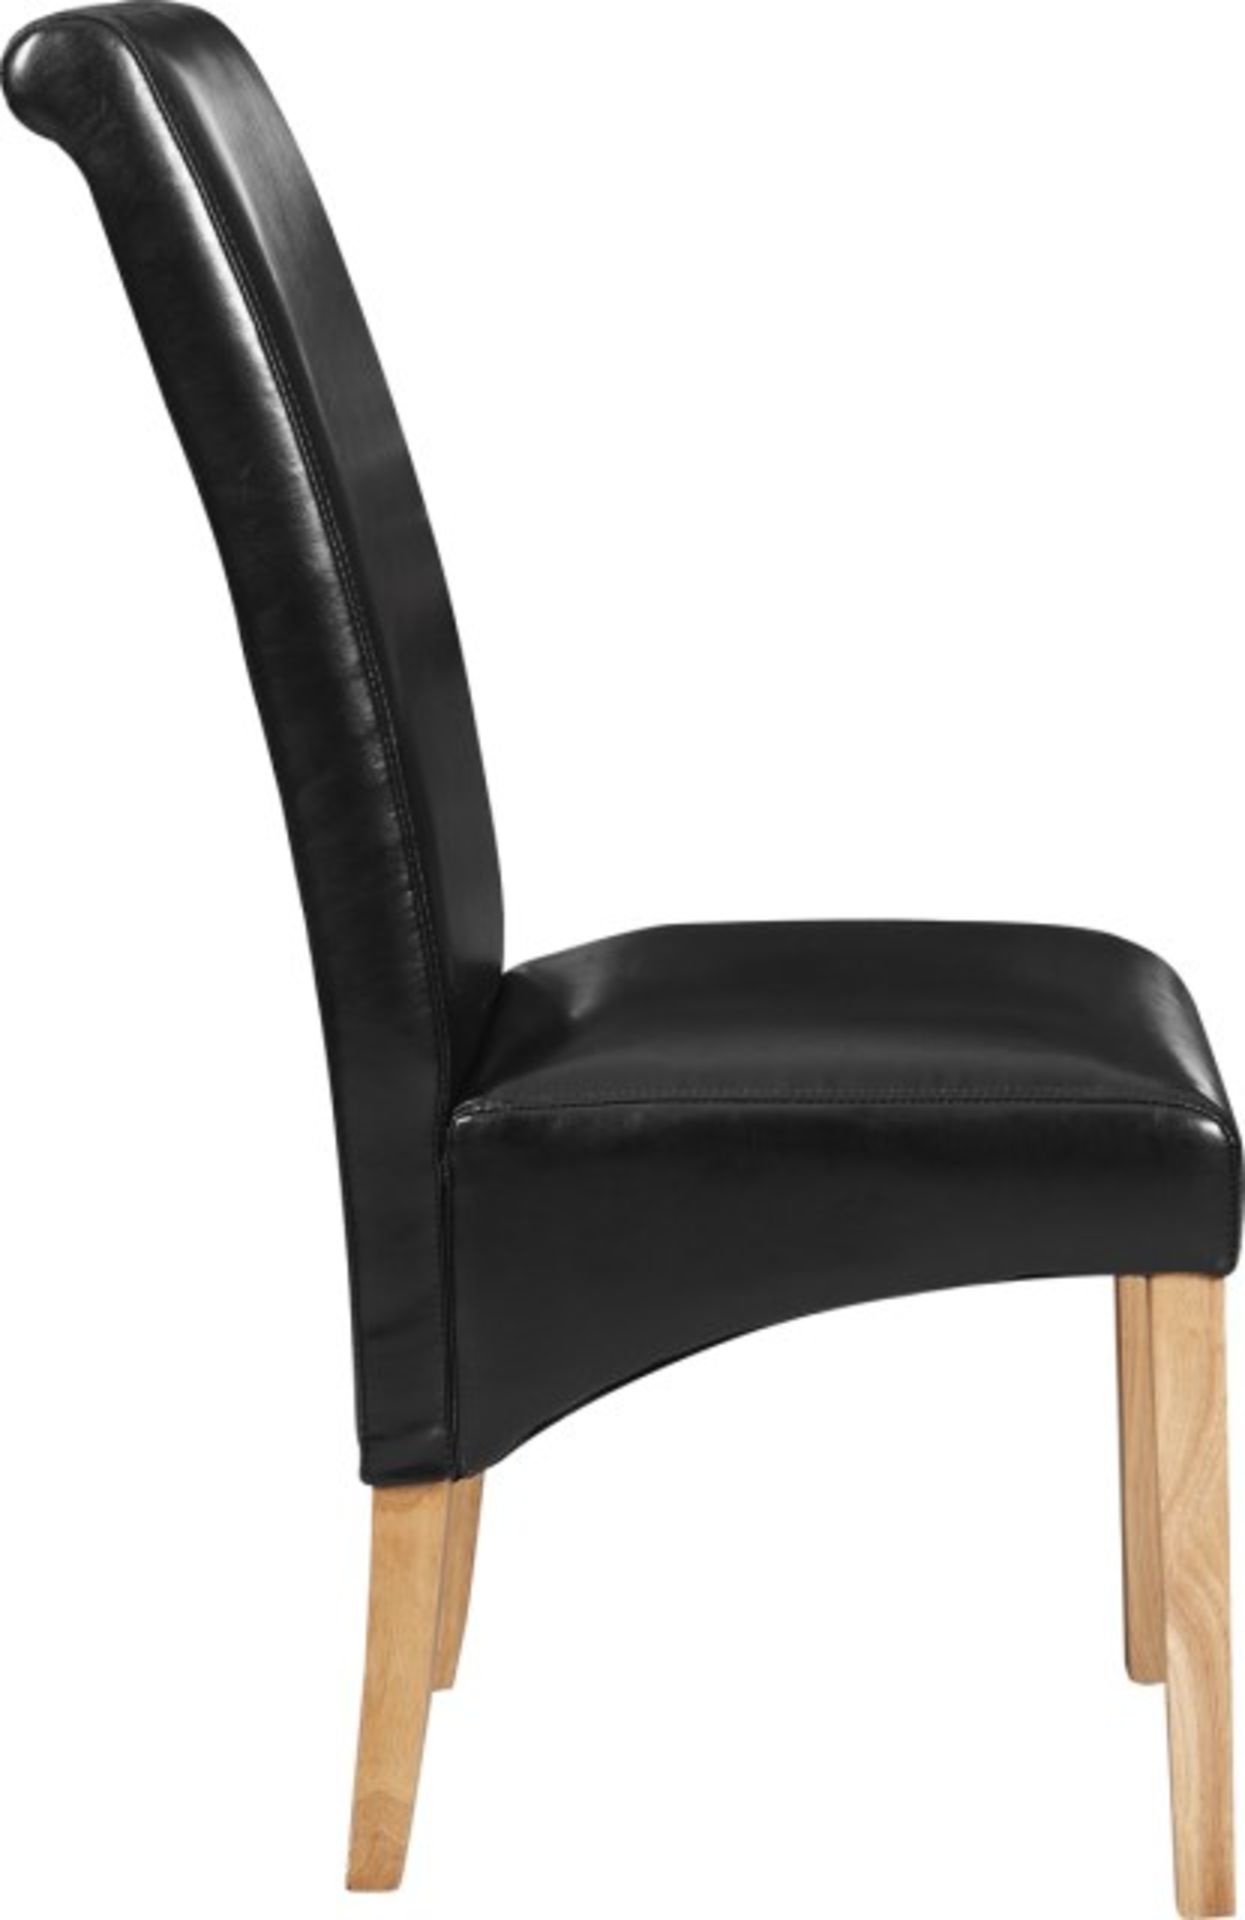 V Grade A Black PU Leather Dining Chair X 2 YOUR BID PRICE TO BE MULTIPLIED BY TWO